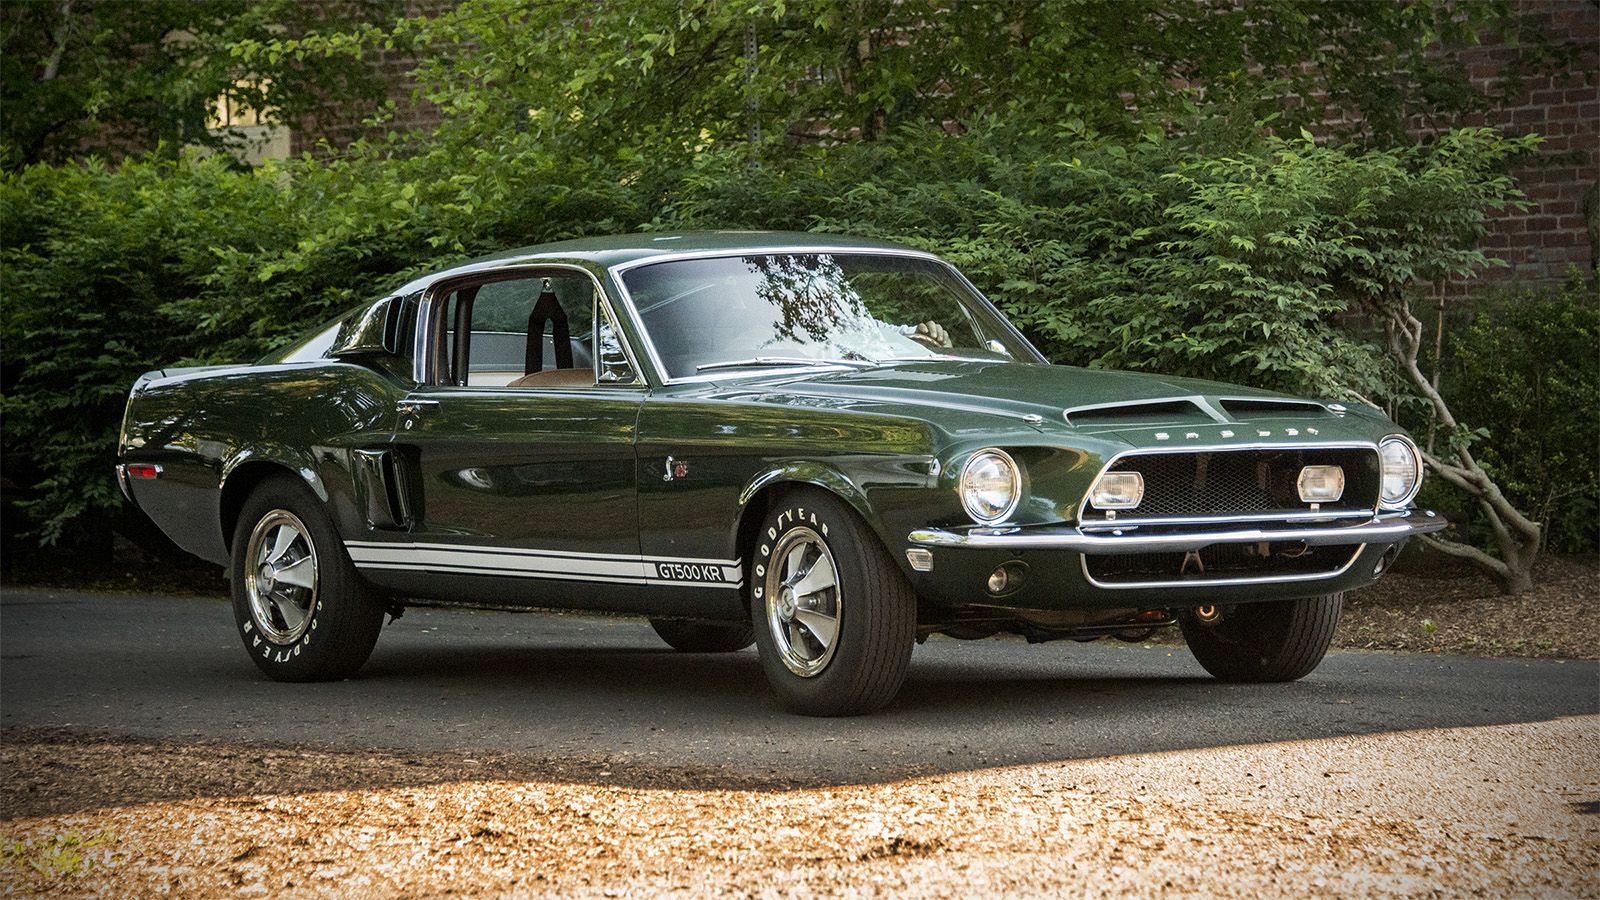 Shelby GT500 history: Carroll Shelby modified performance Ford Mustangs